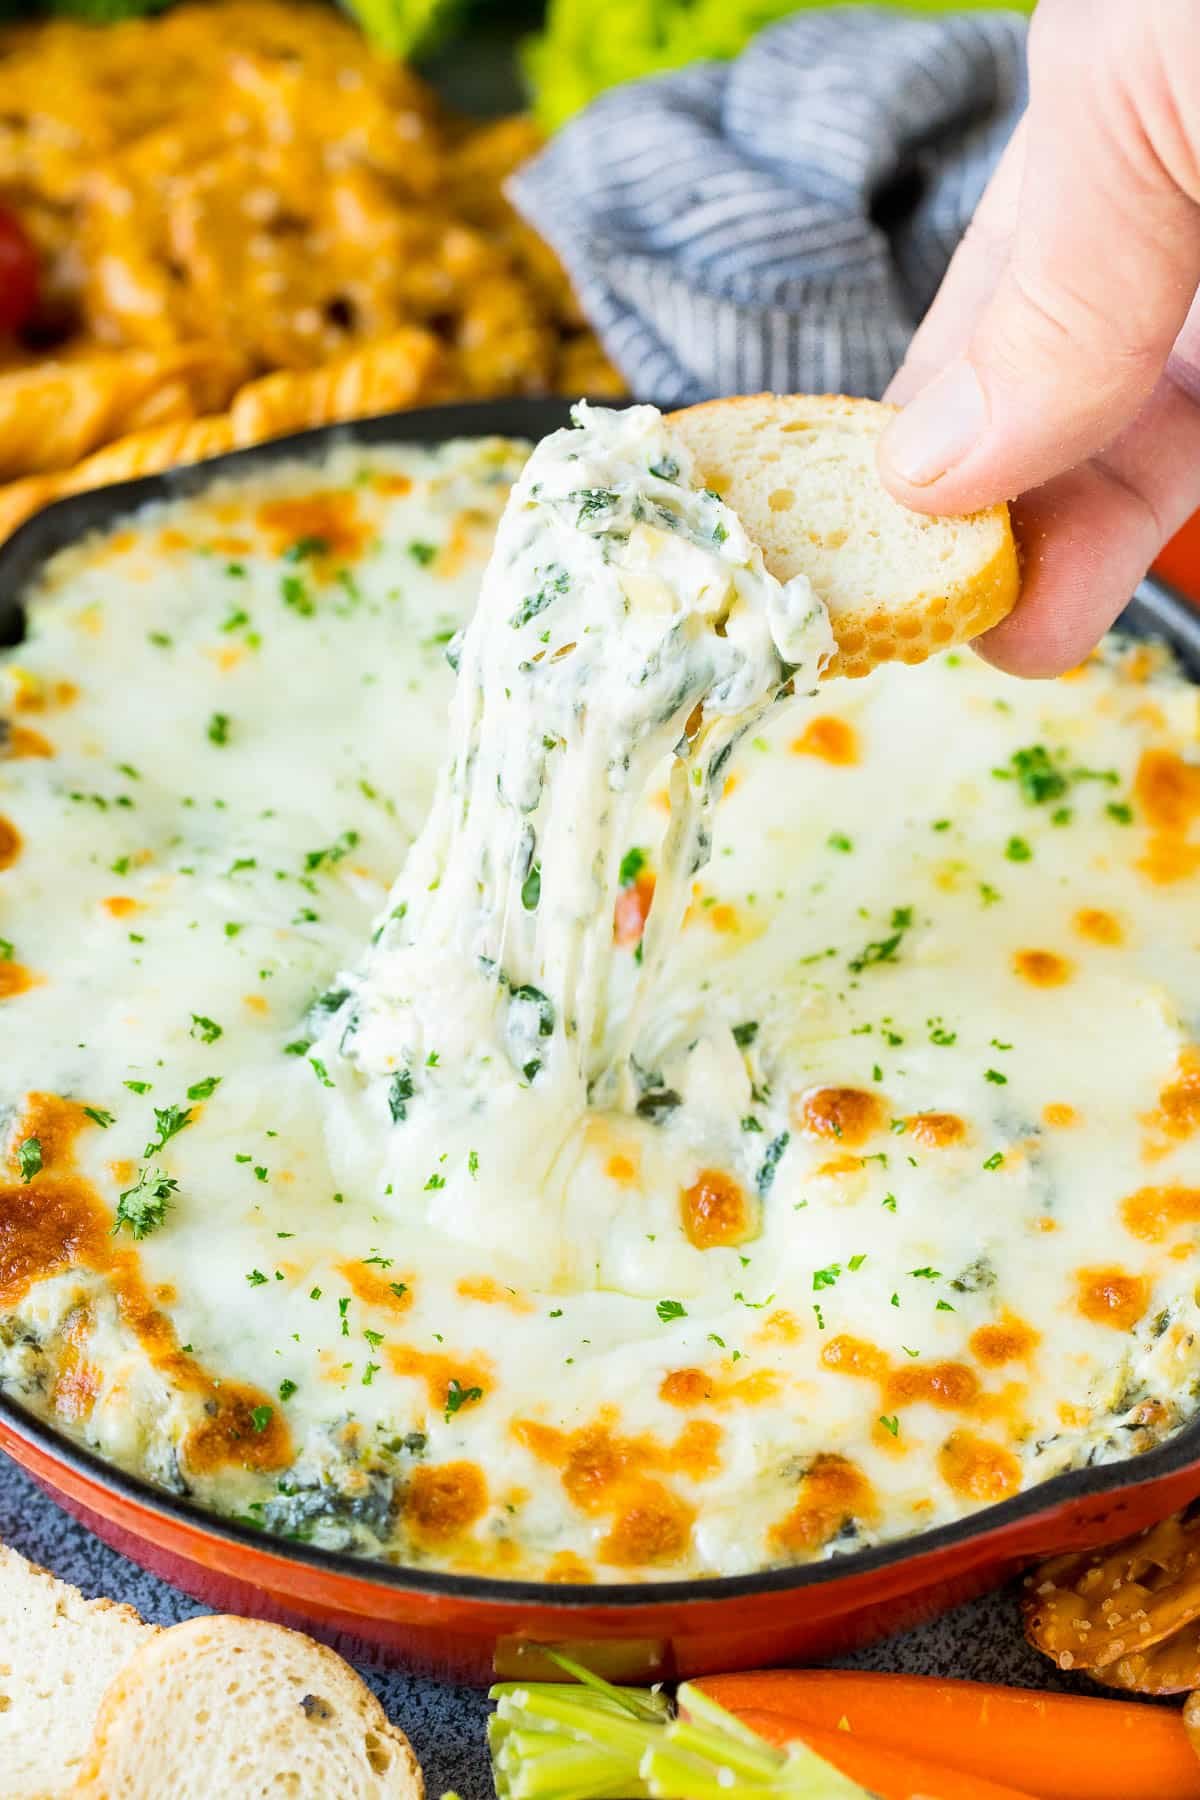 A slice of bread scooping up a serving of spinach artichoke dip.